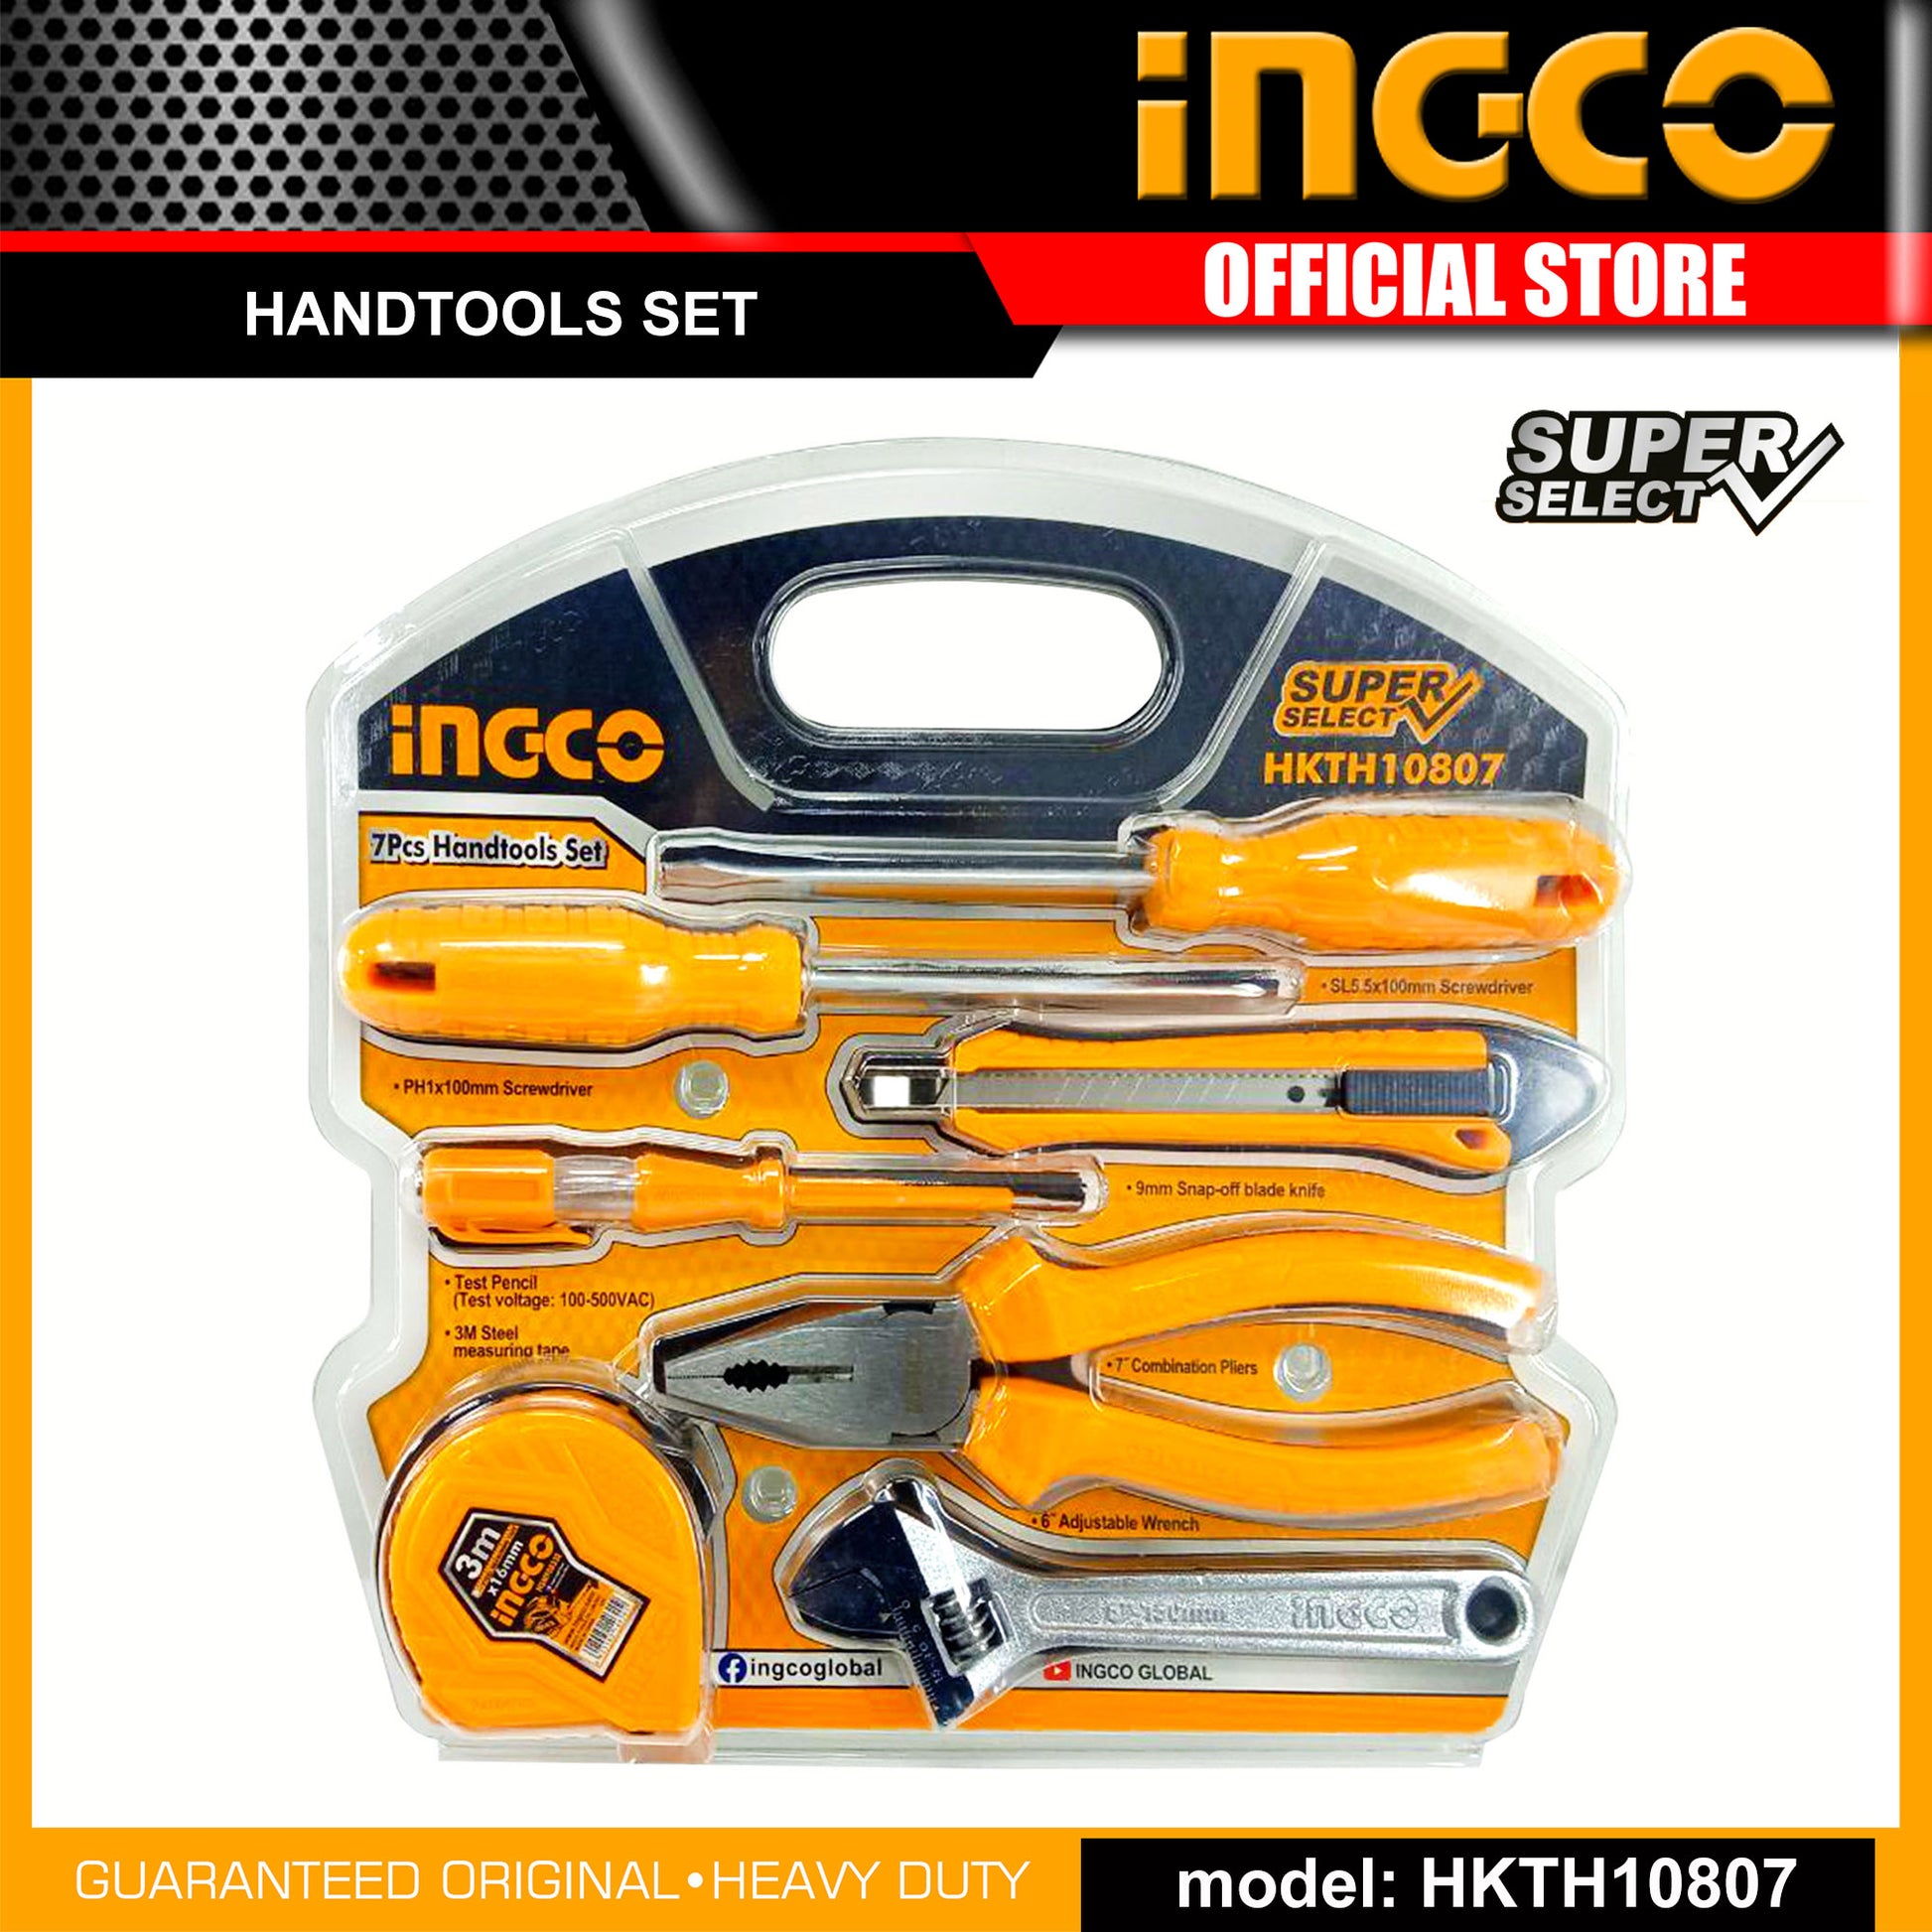 INGCO 7 PC's Hand tools set (Plier, Wrench, Cutter, Tester, 2pcs Screwdriver & measuring tape)